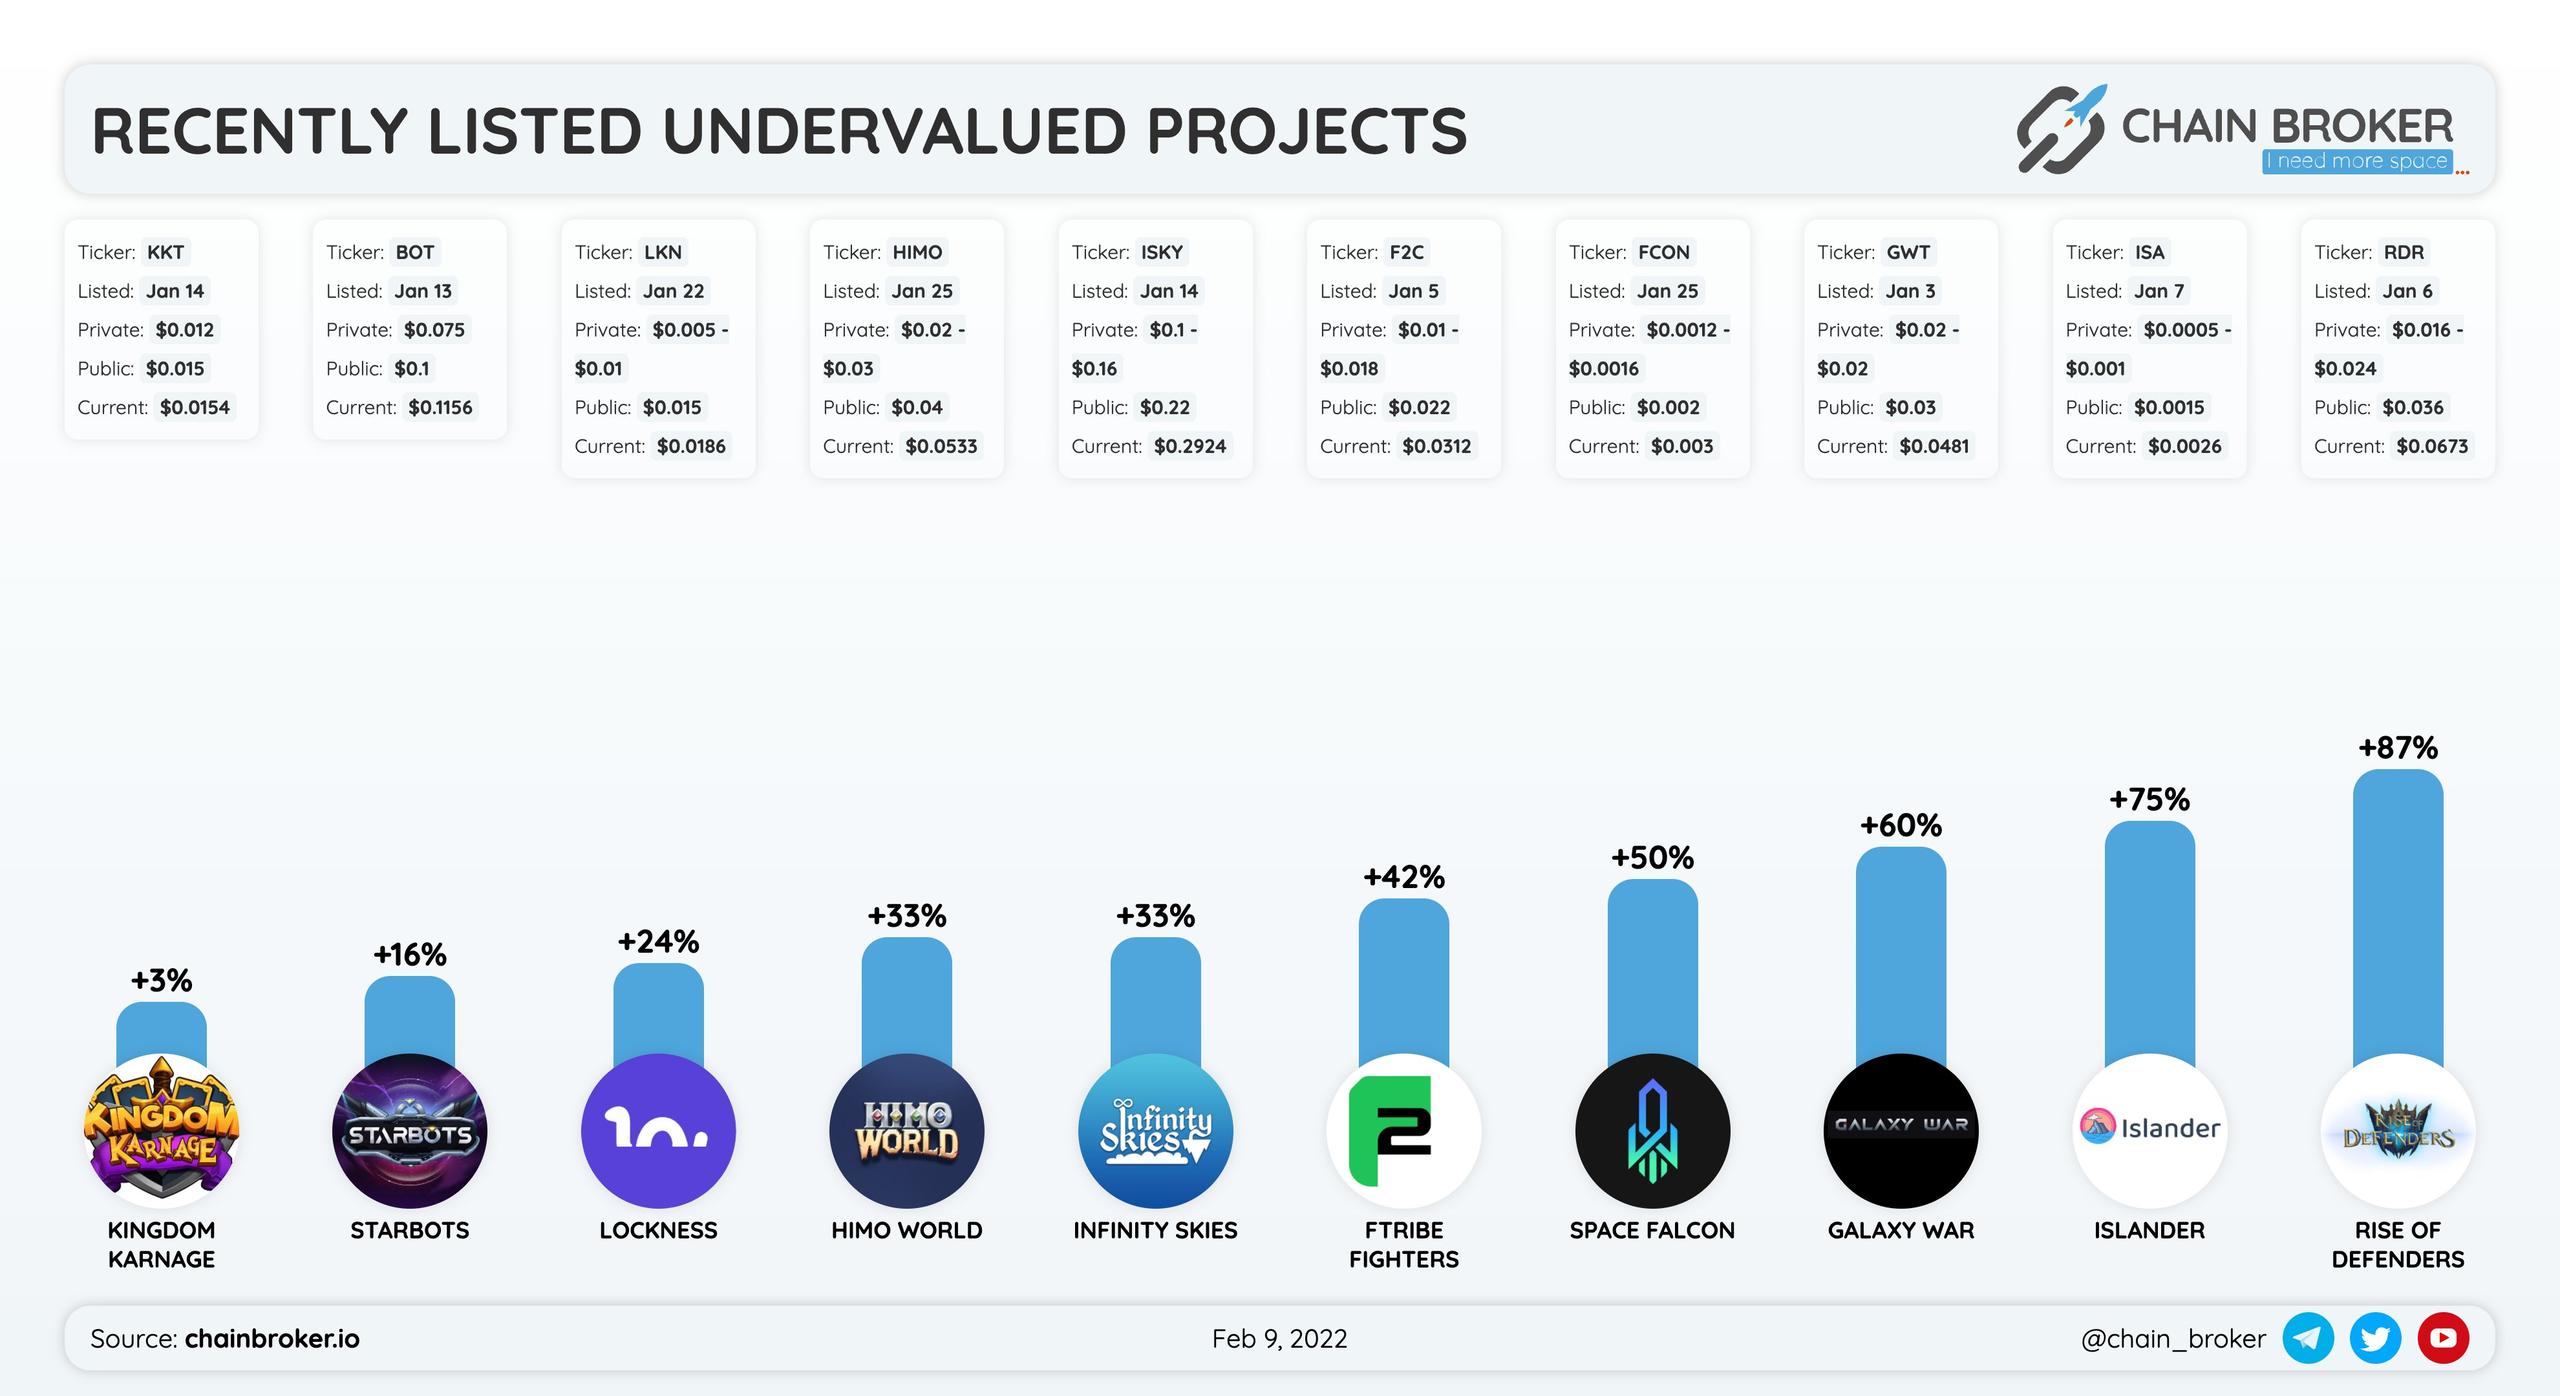 Recently listed undervalued projects